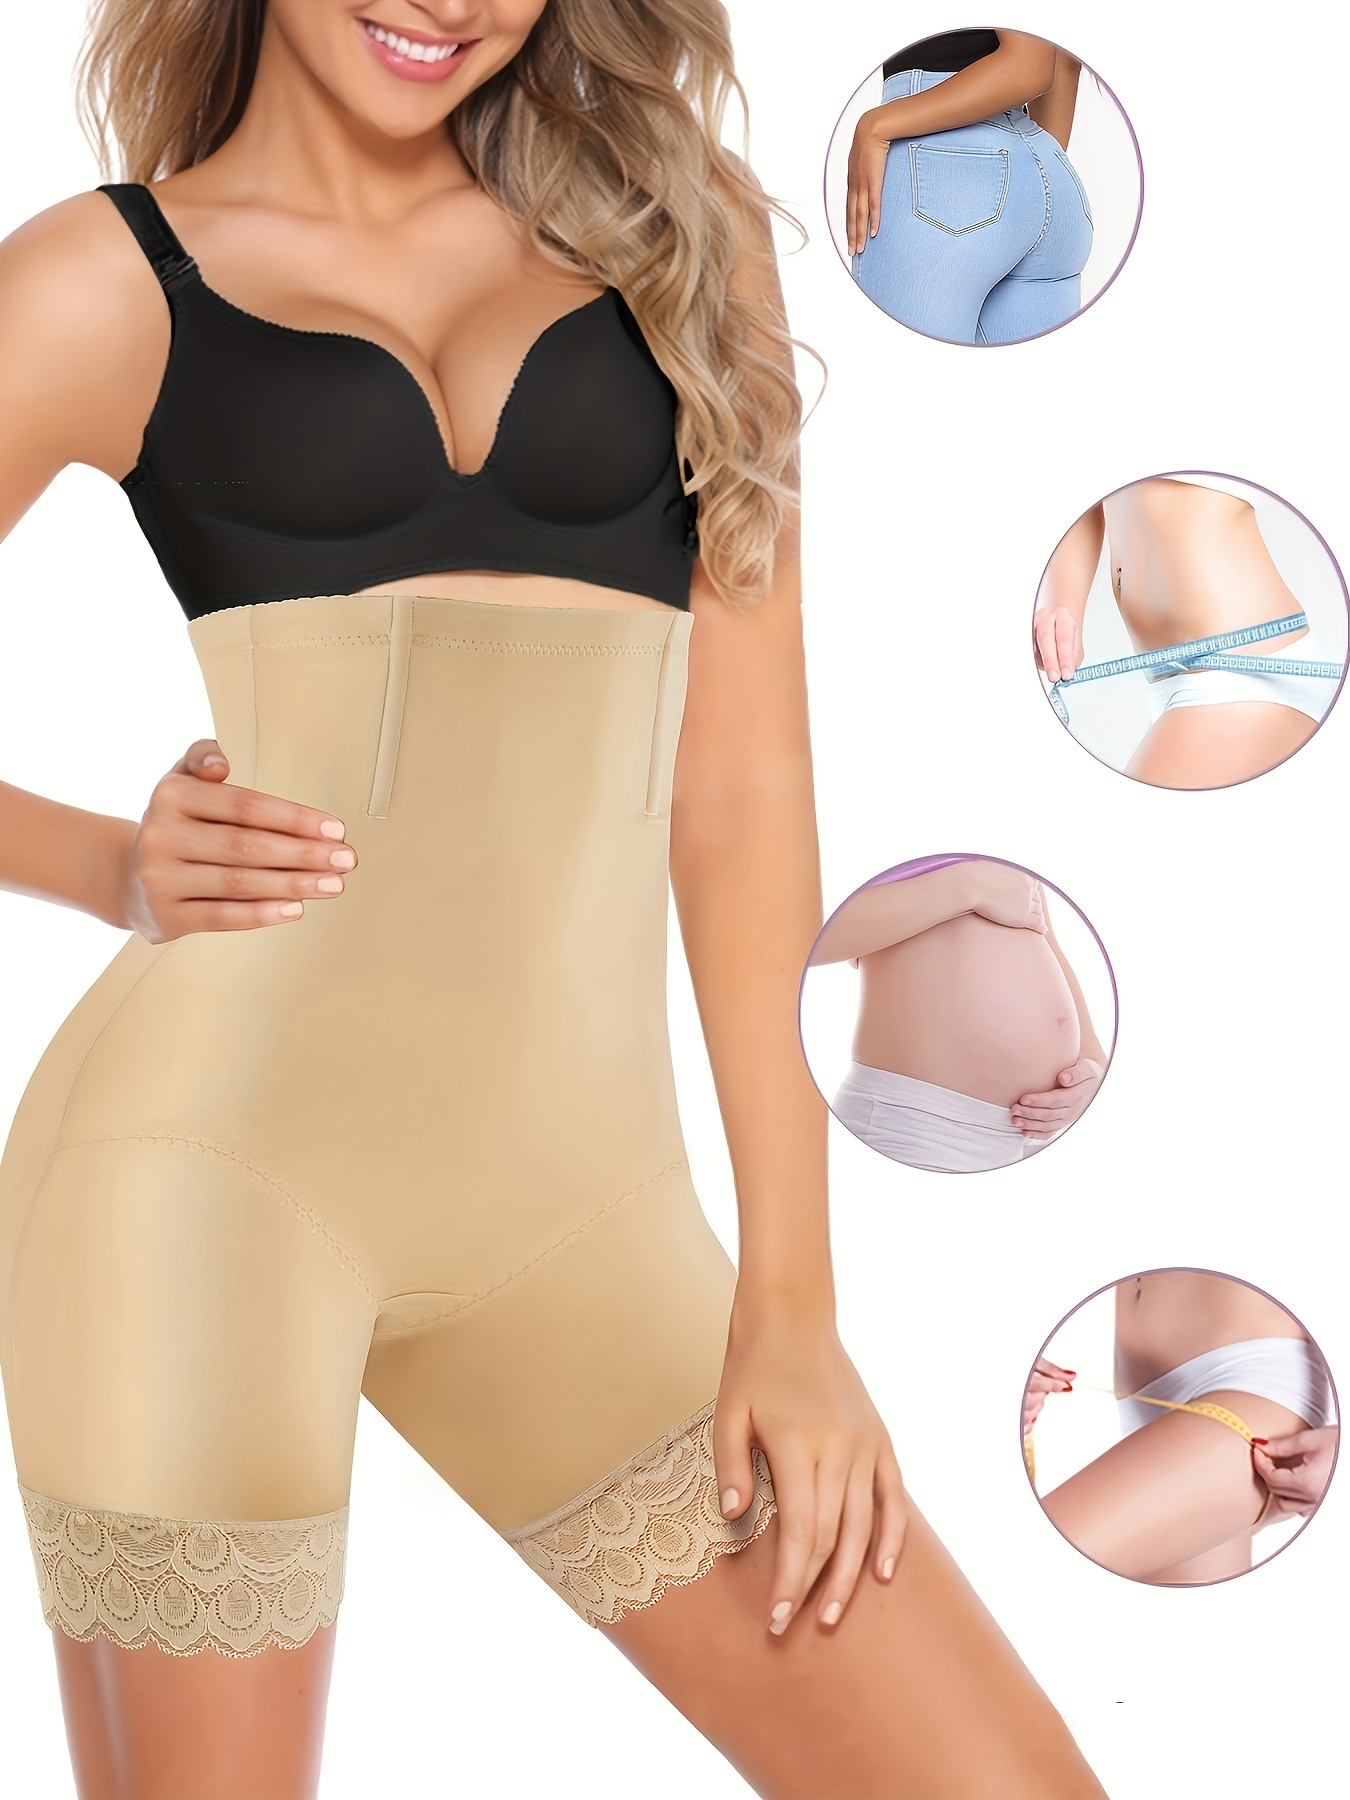 Body Shaper Panties With High Waist Panty Girdle - Tummy Trimmer